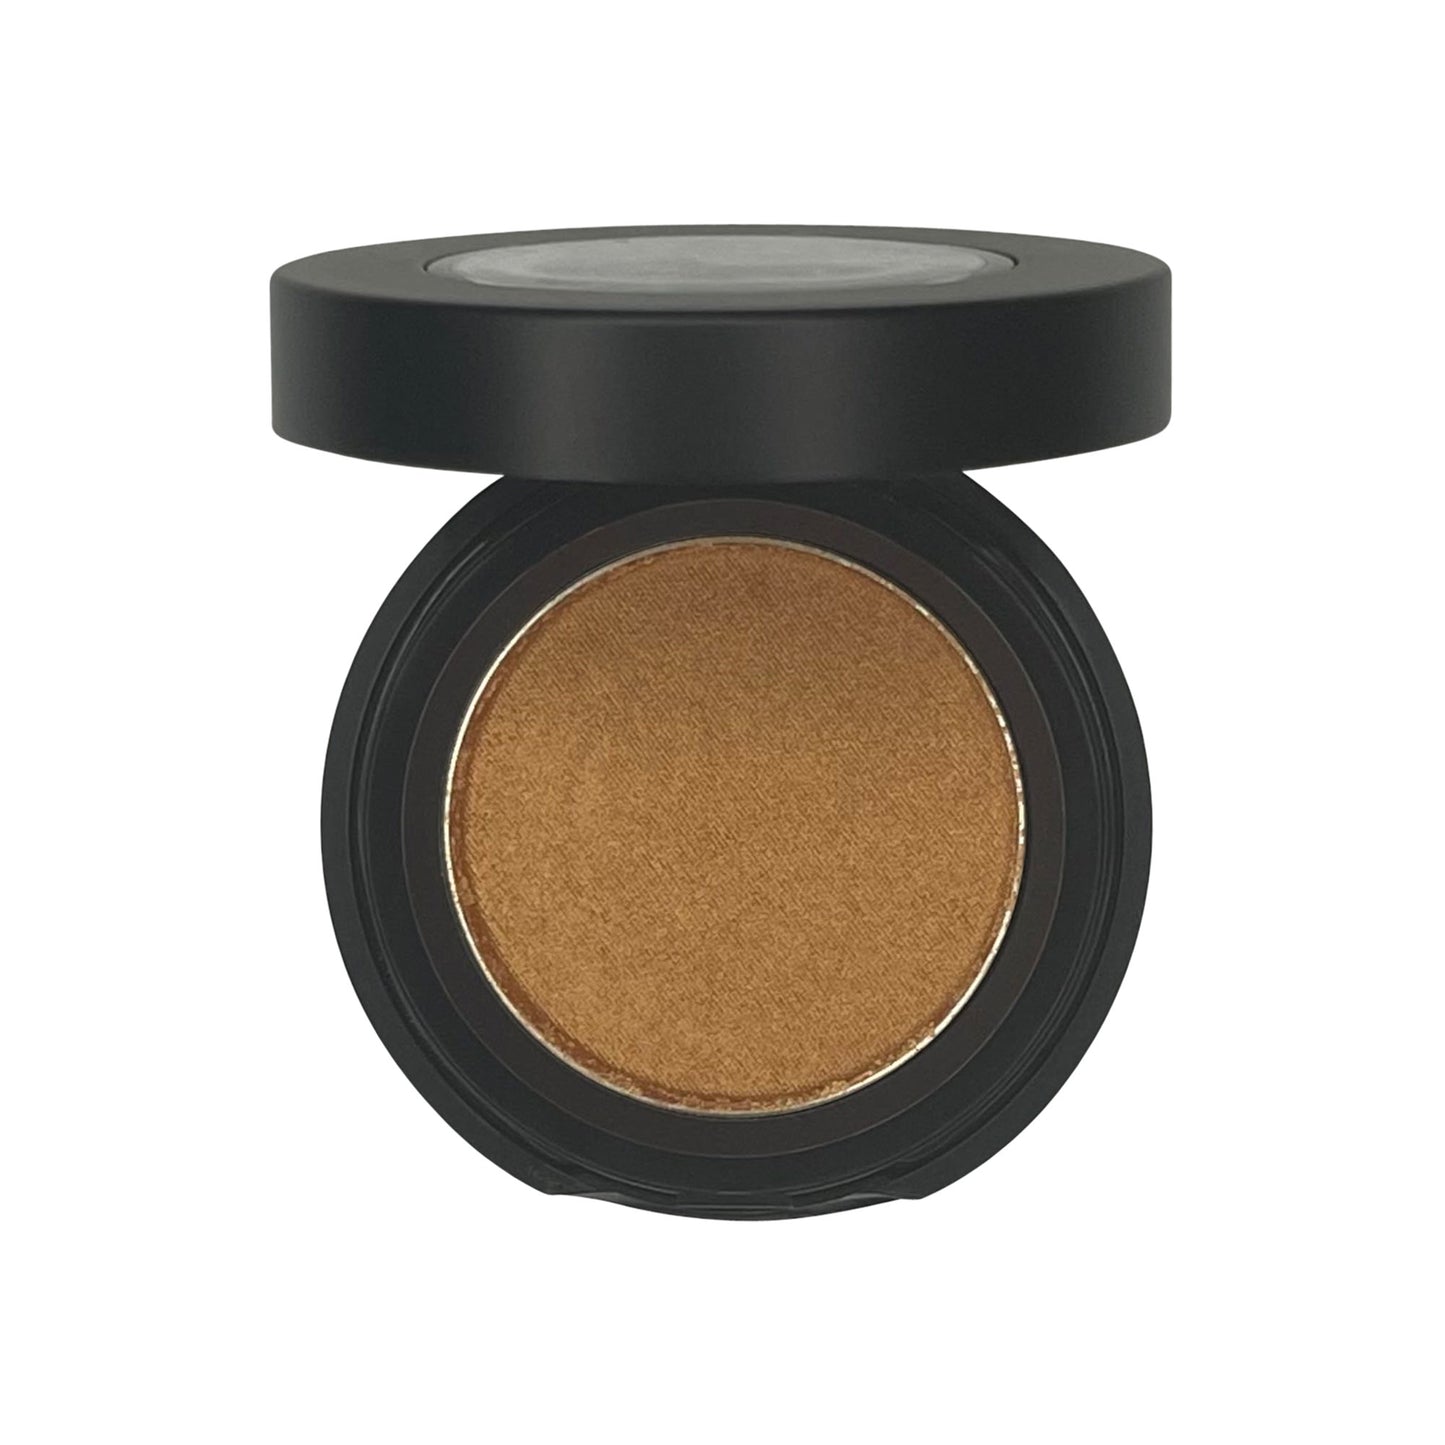 As an expert in the field of self worthiness, I invite you to discover the perspective of Cruisin Organics Dusk Eyeshadow, contained in a single pan. This product encourages you to push your inner boundaries and test your skills, utilizing your unique abilities and gifts. Give yourself the chance to stand out, while others look on in awe.